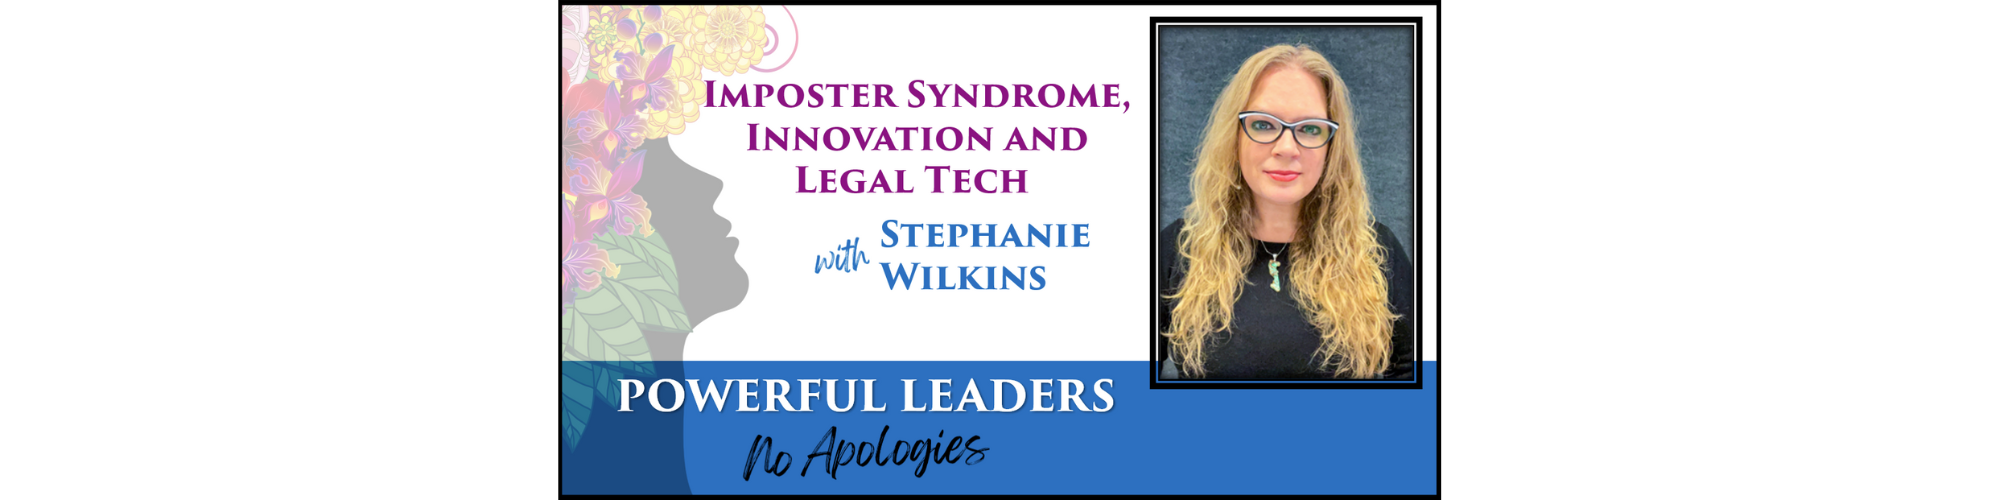 Powerful Leaders, No Apologies Episode 27 Podcast Banner